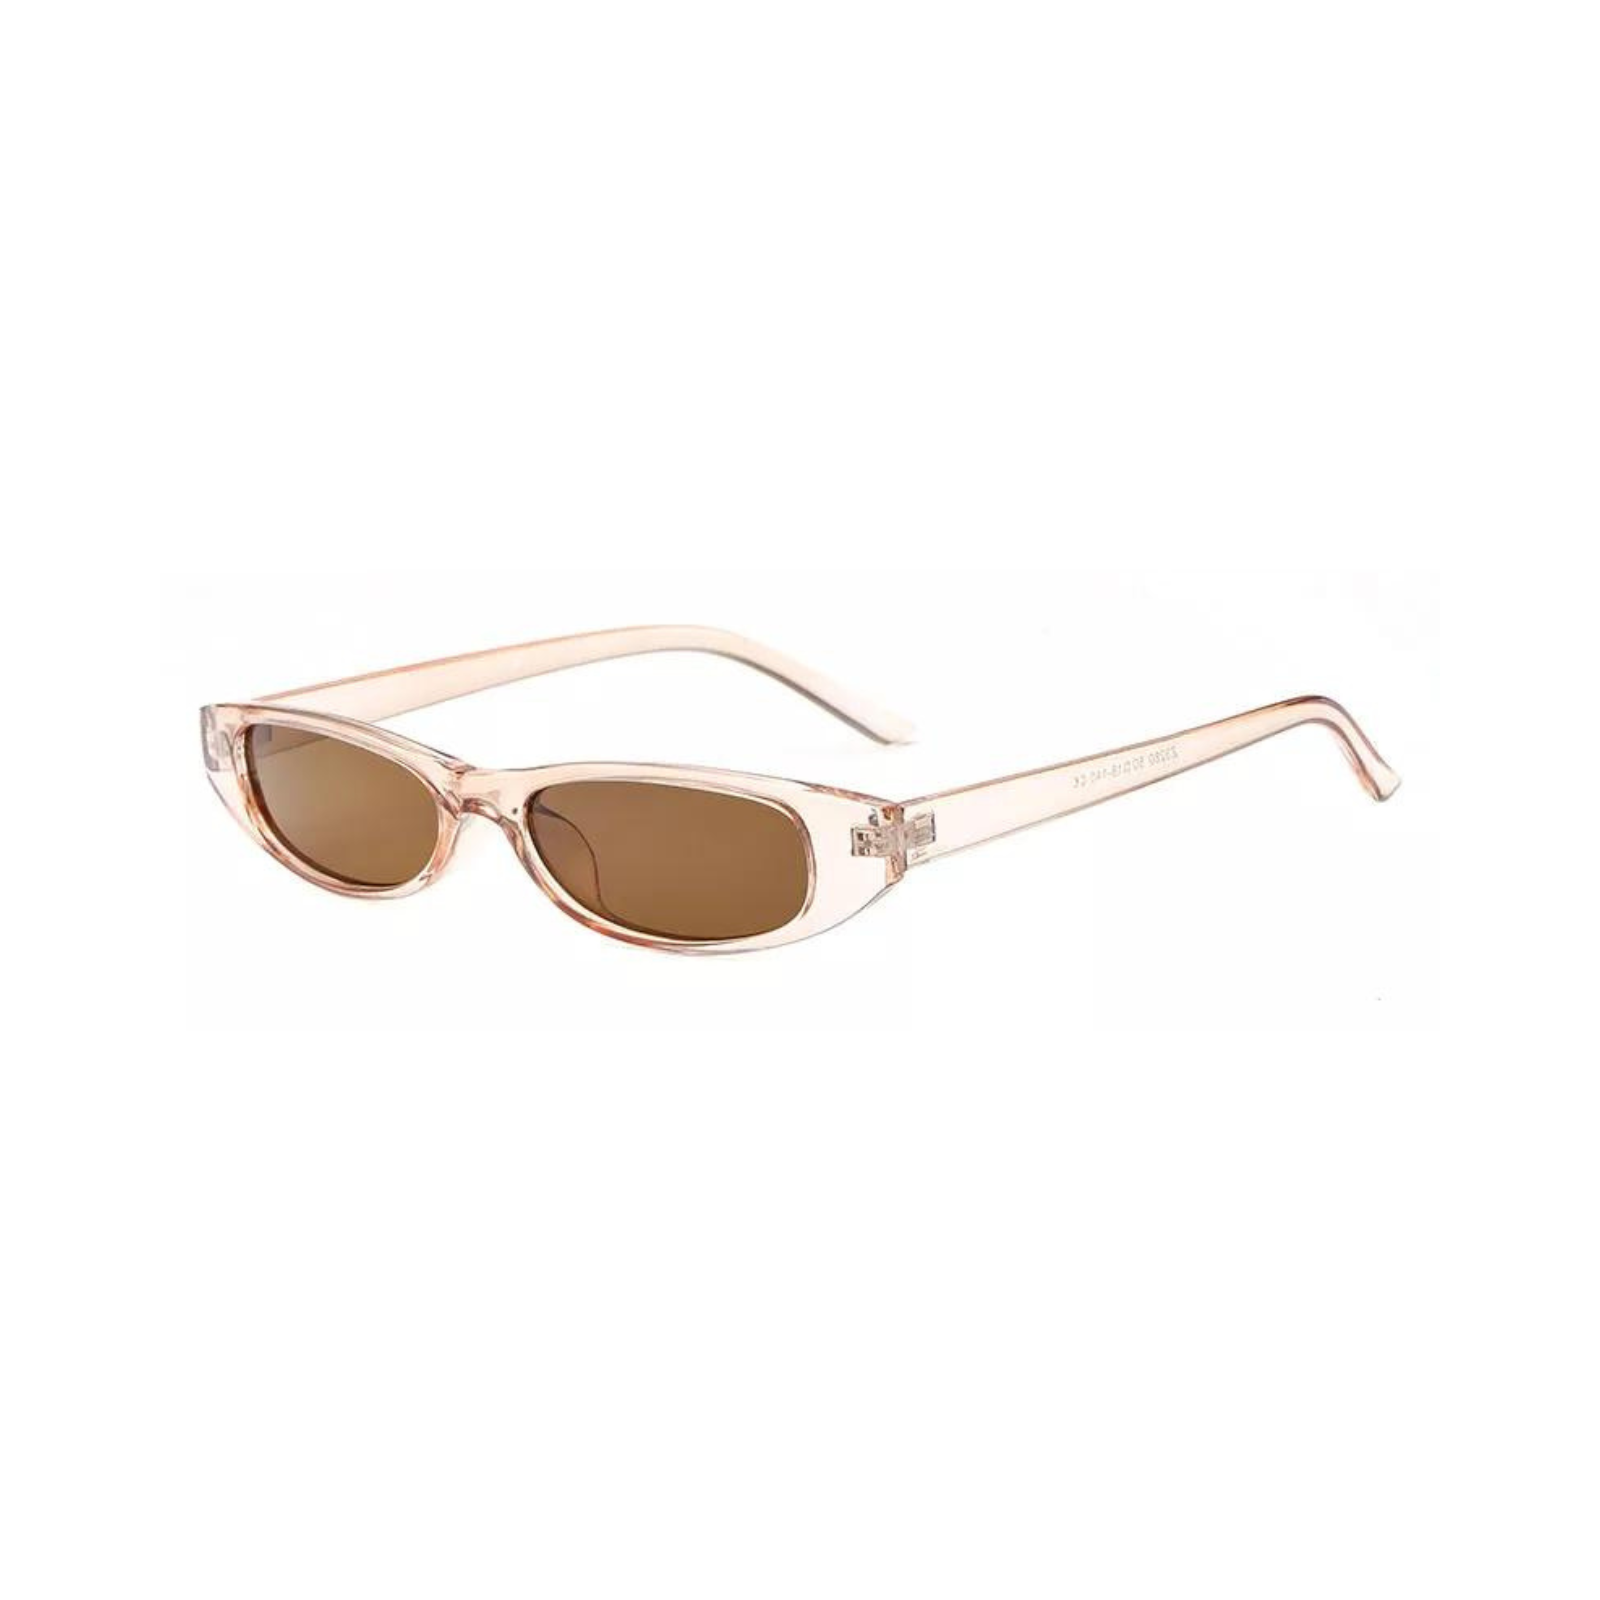 Paige Sunglasses  / Clear + Brown